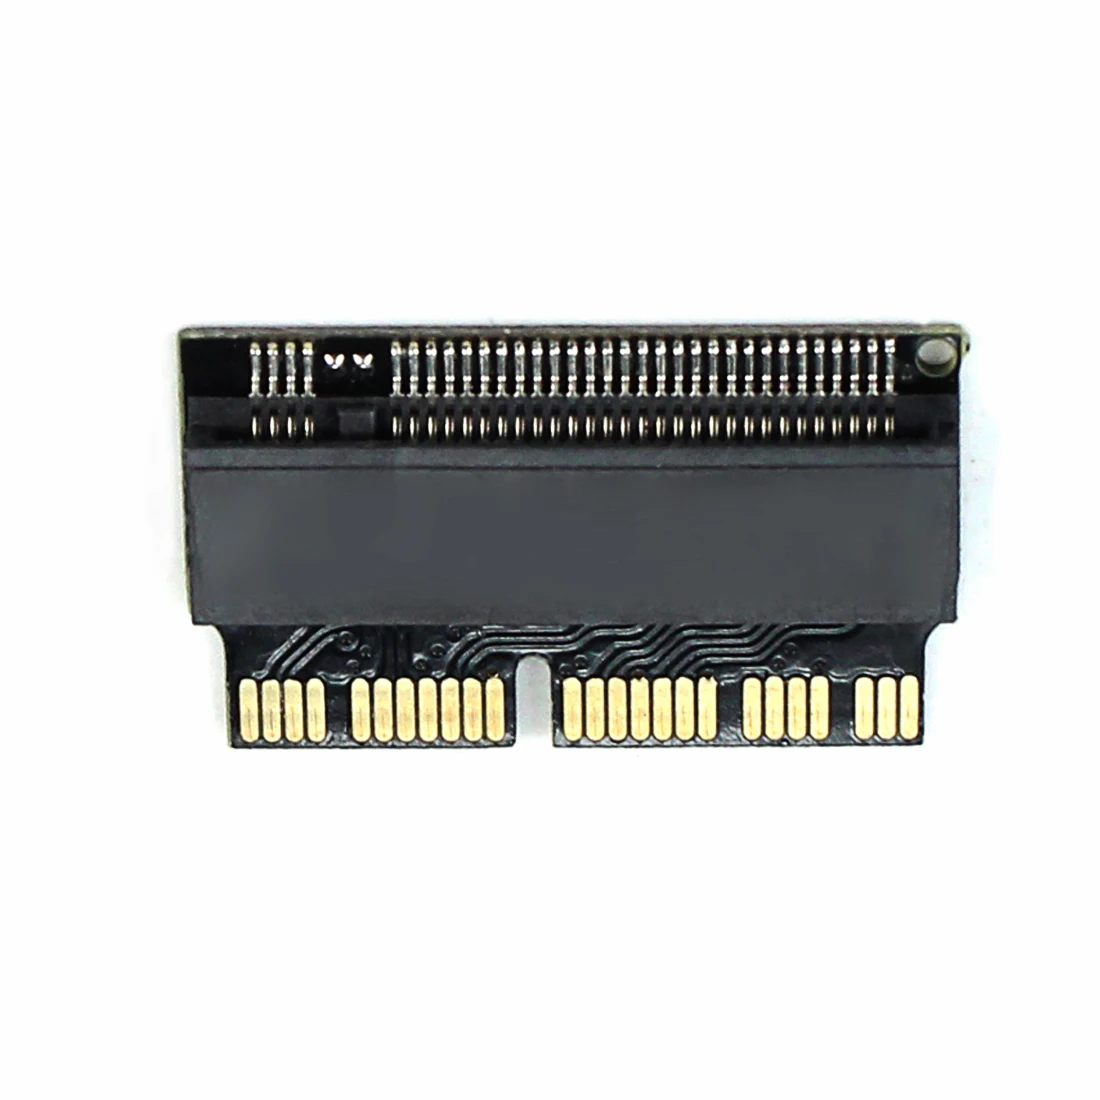 

for NVMe PCIe M.2 for NGFF to SSD Adapter Card for Apple Laptop Macbook Air Pro 2013 2014 2015 A1465 A1466 A1502 A1398 PCIE x4